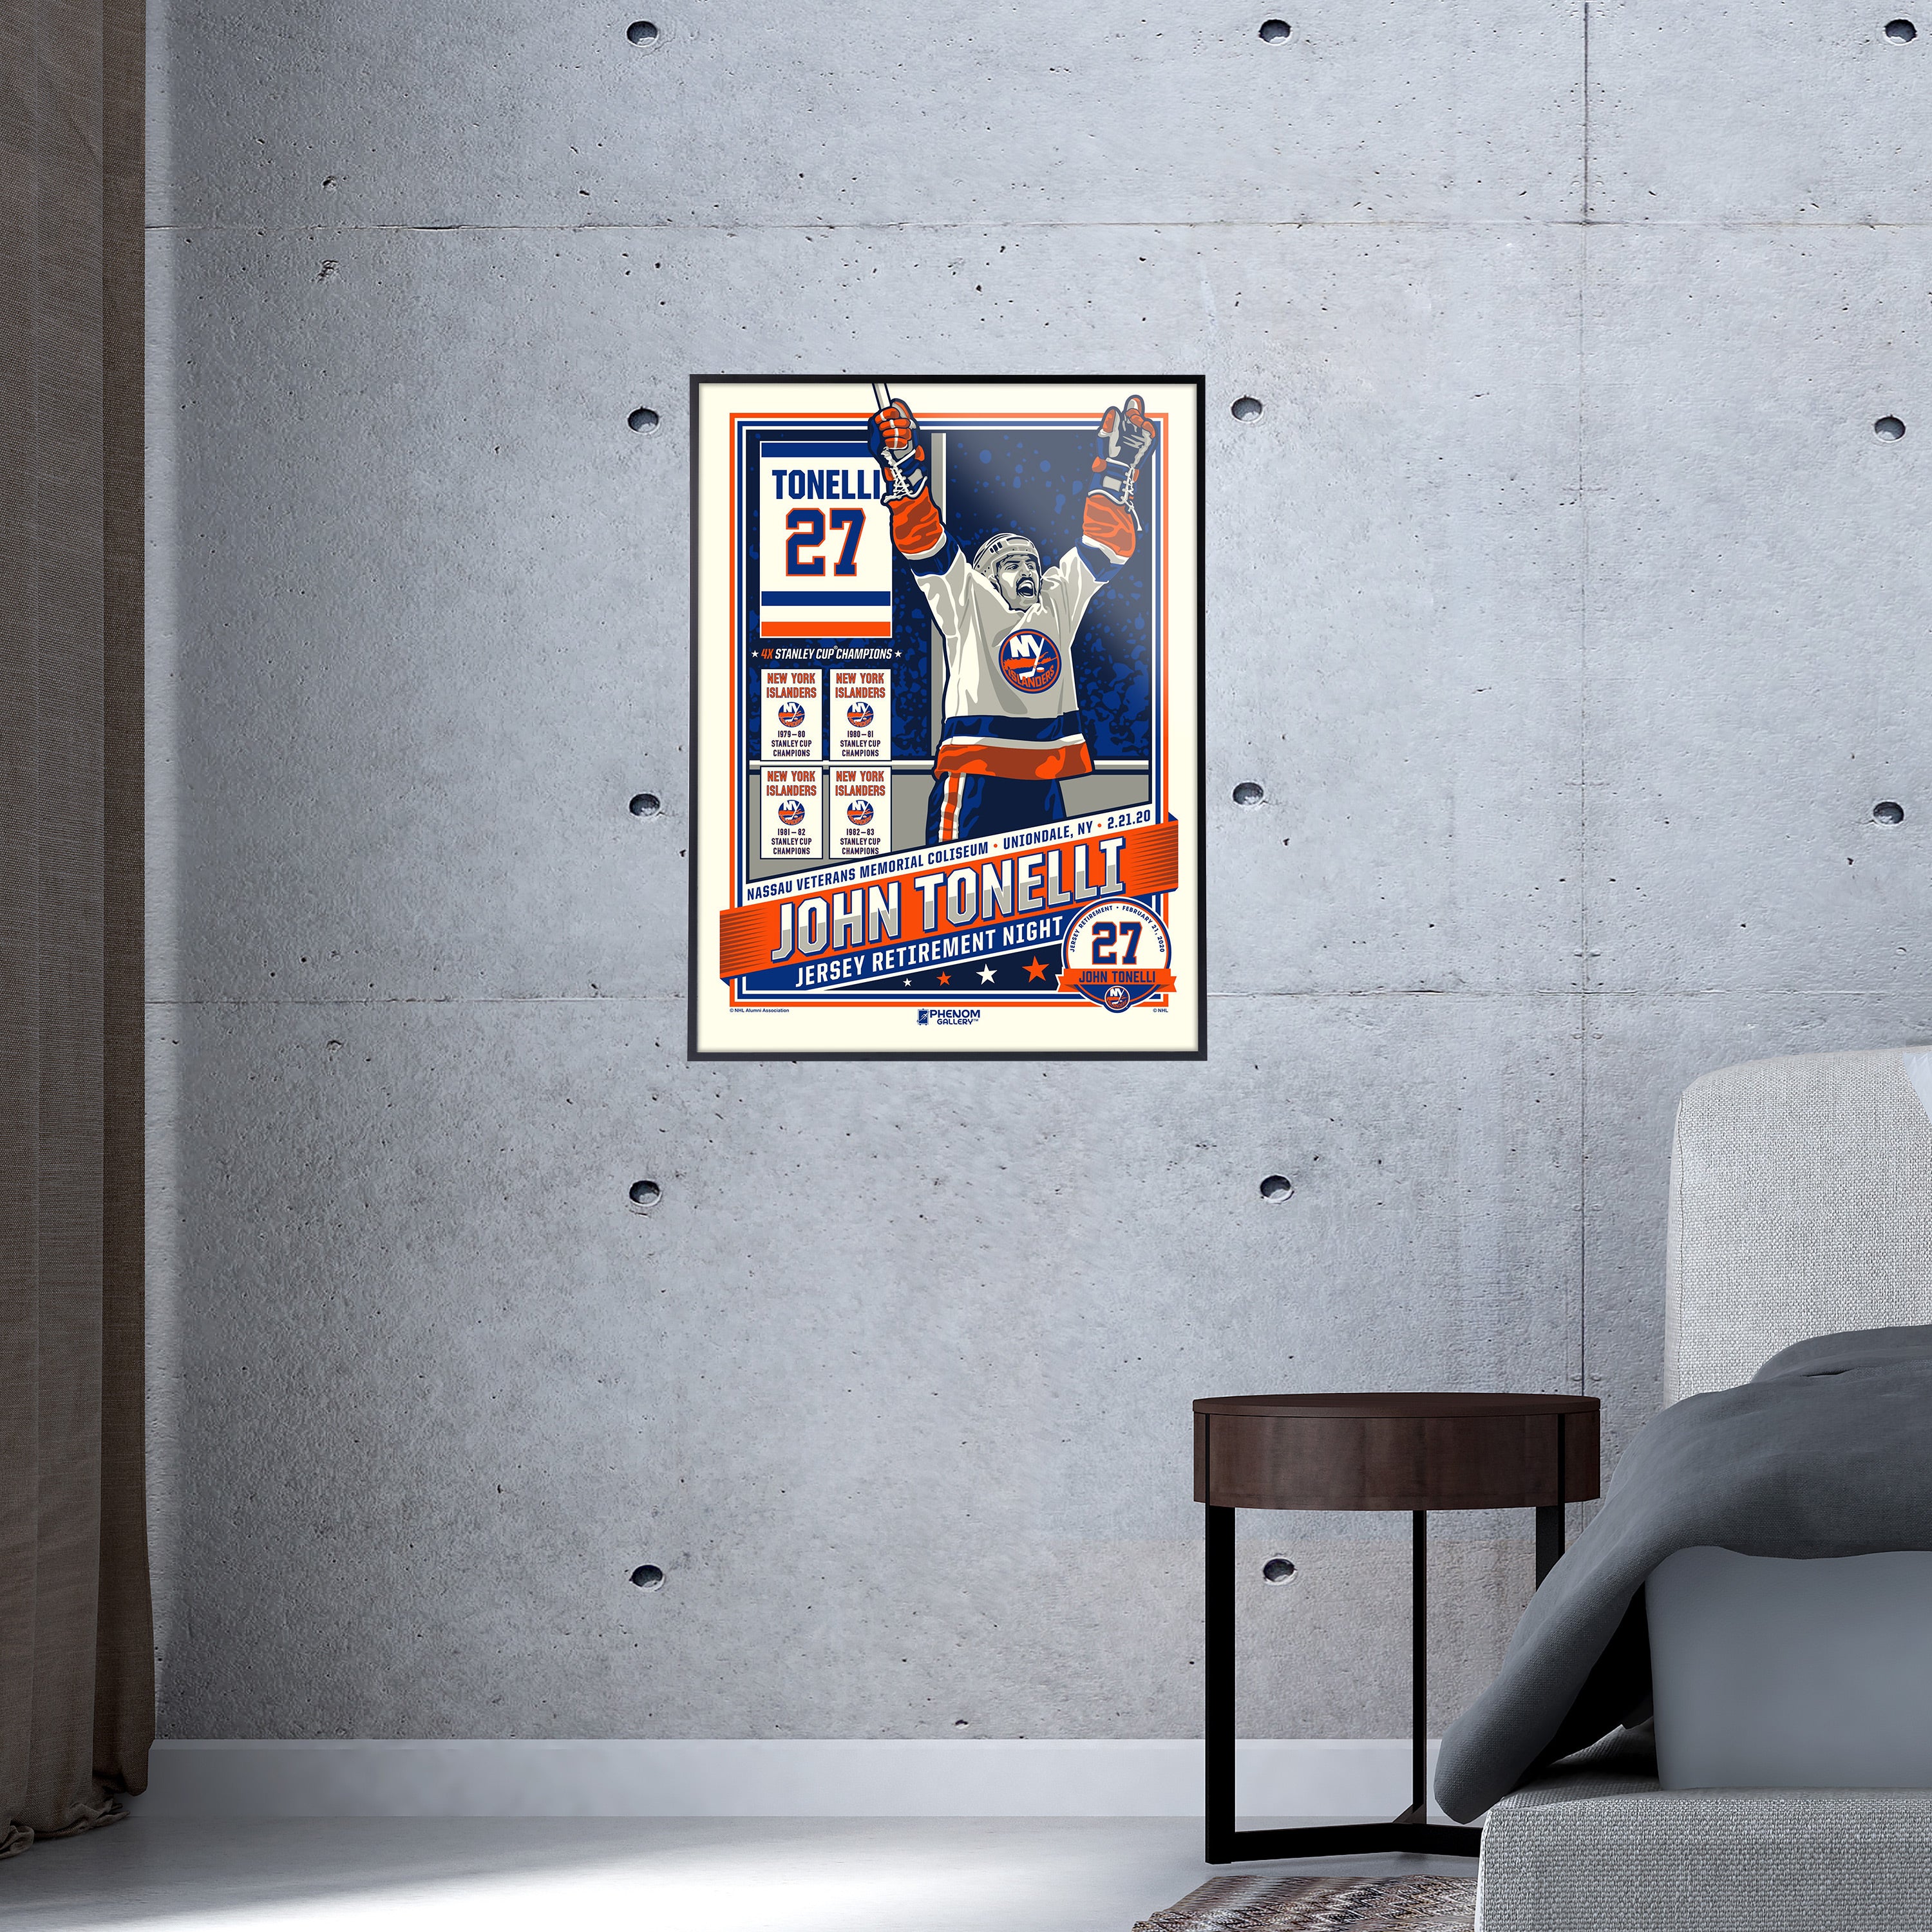 New York Knicks Original Painting With Retired Jersey Numbers